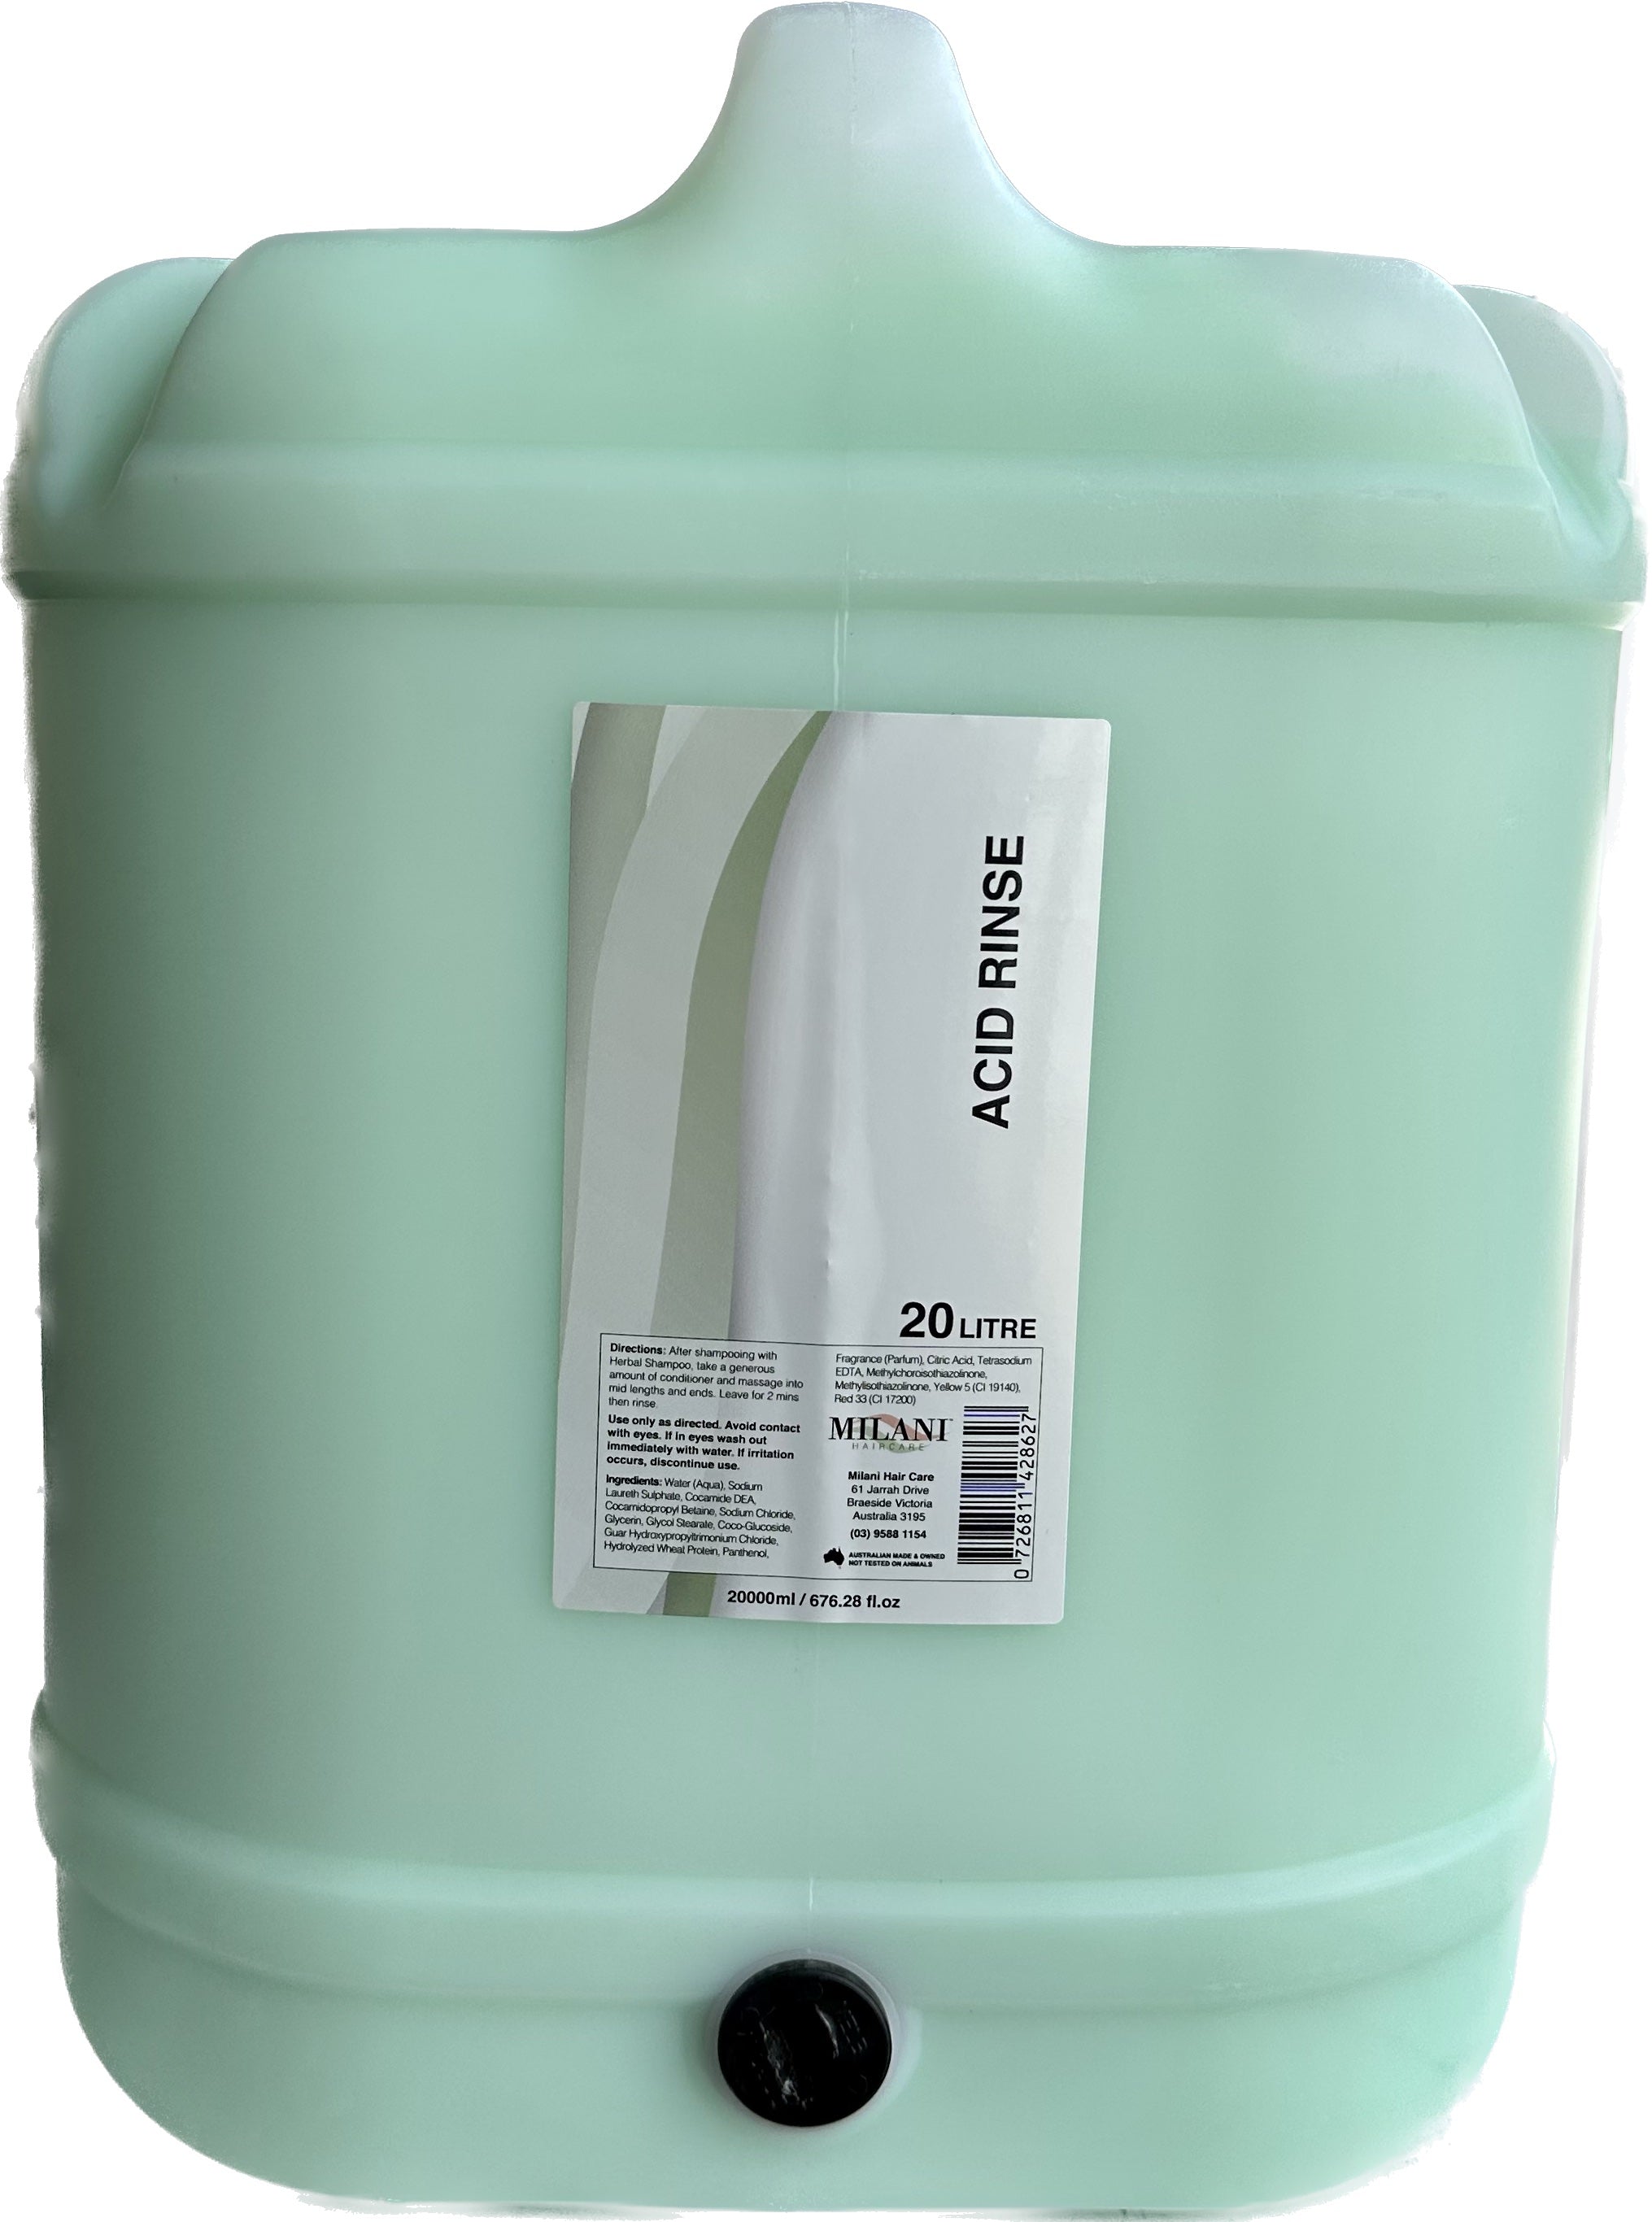 Milani Haircare Herbal Conditioner (Acid Rinse) 20 Litre